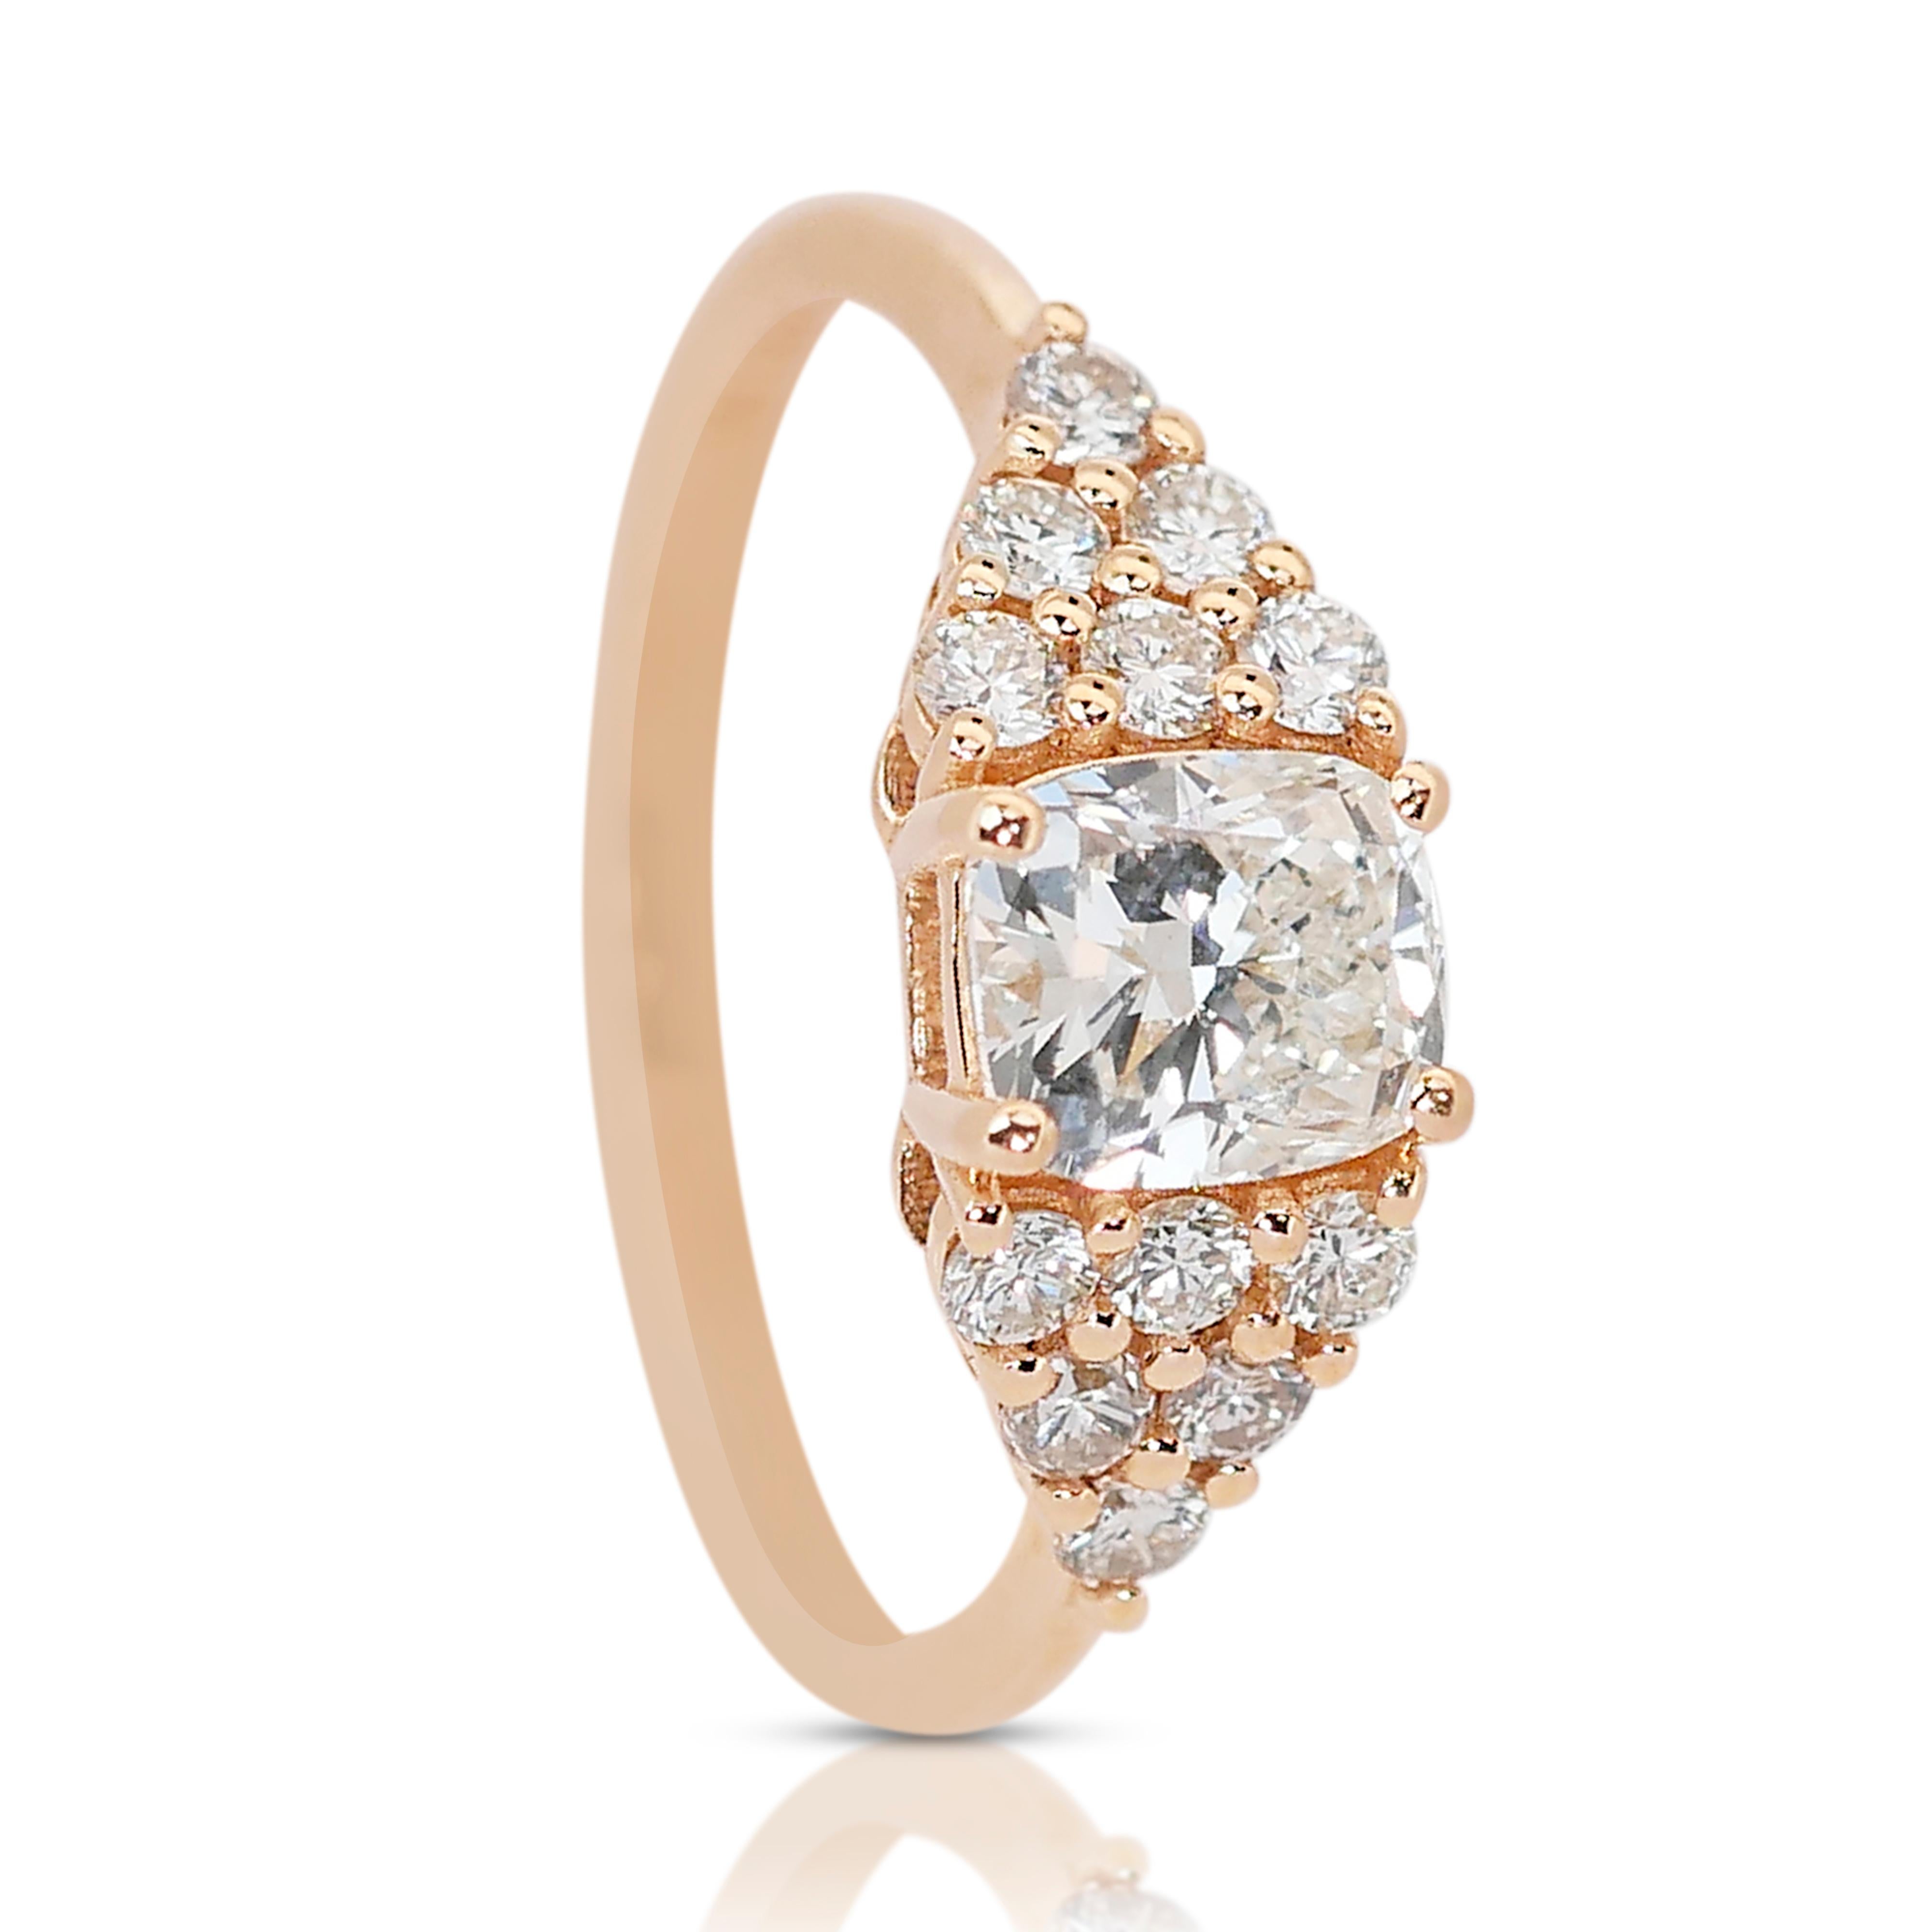 Cushion Cut Luminous 1.41ct Diamonds Pave Ring in 18k Yellow Gold - IGI Certified For Sale